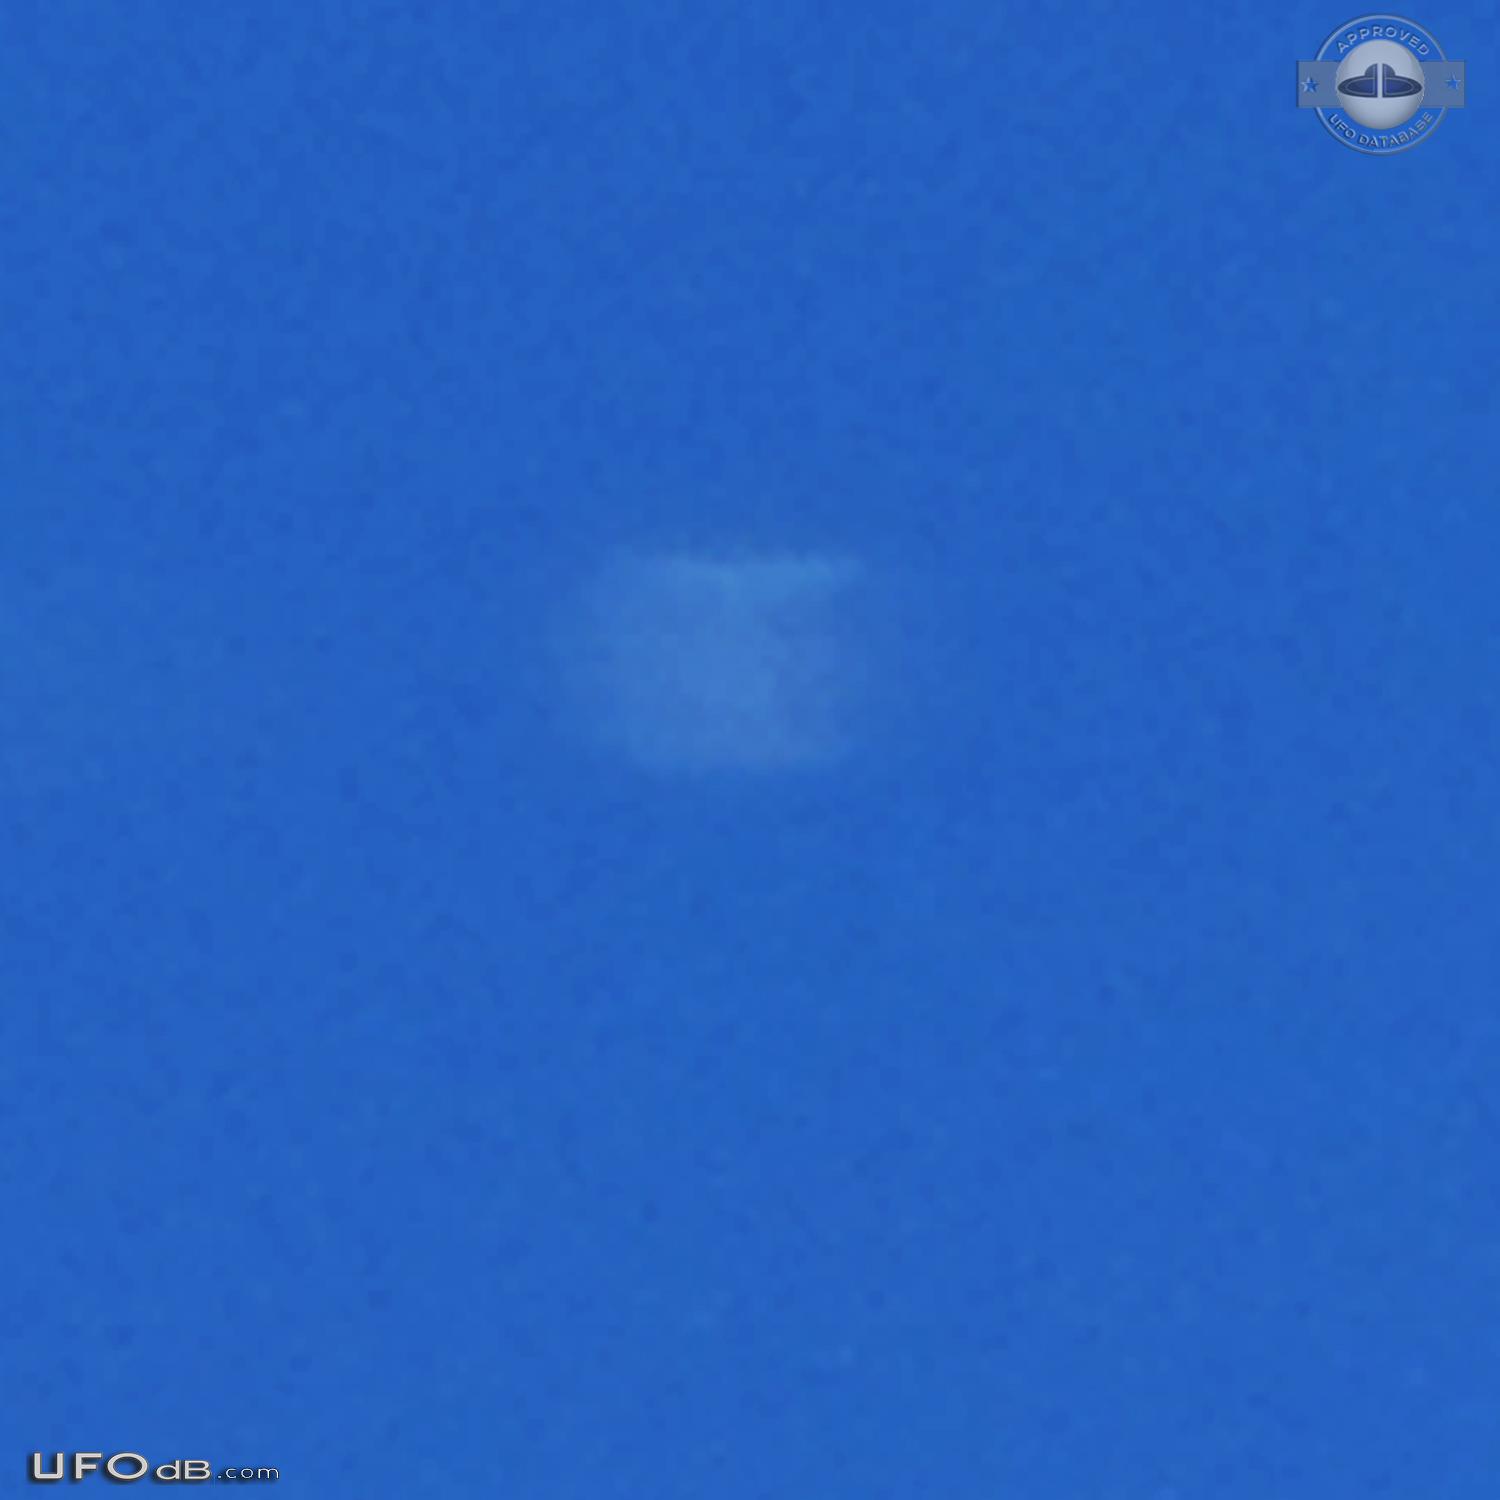 Took a picture and saw the UFO later on picture St-Tropez France 2012 UFO Picture #716-6